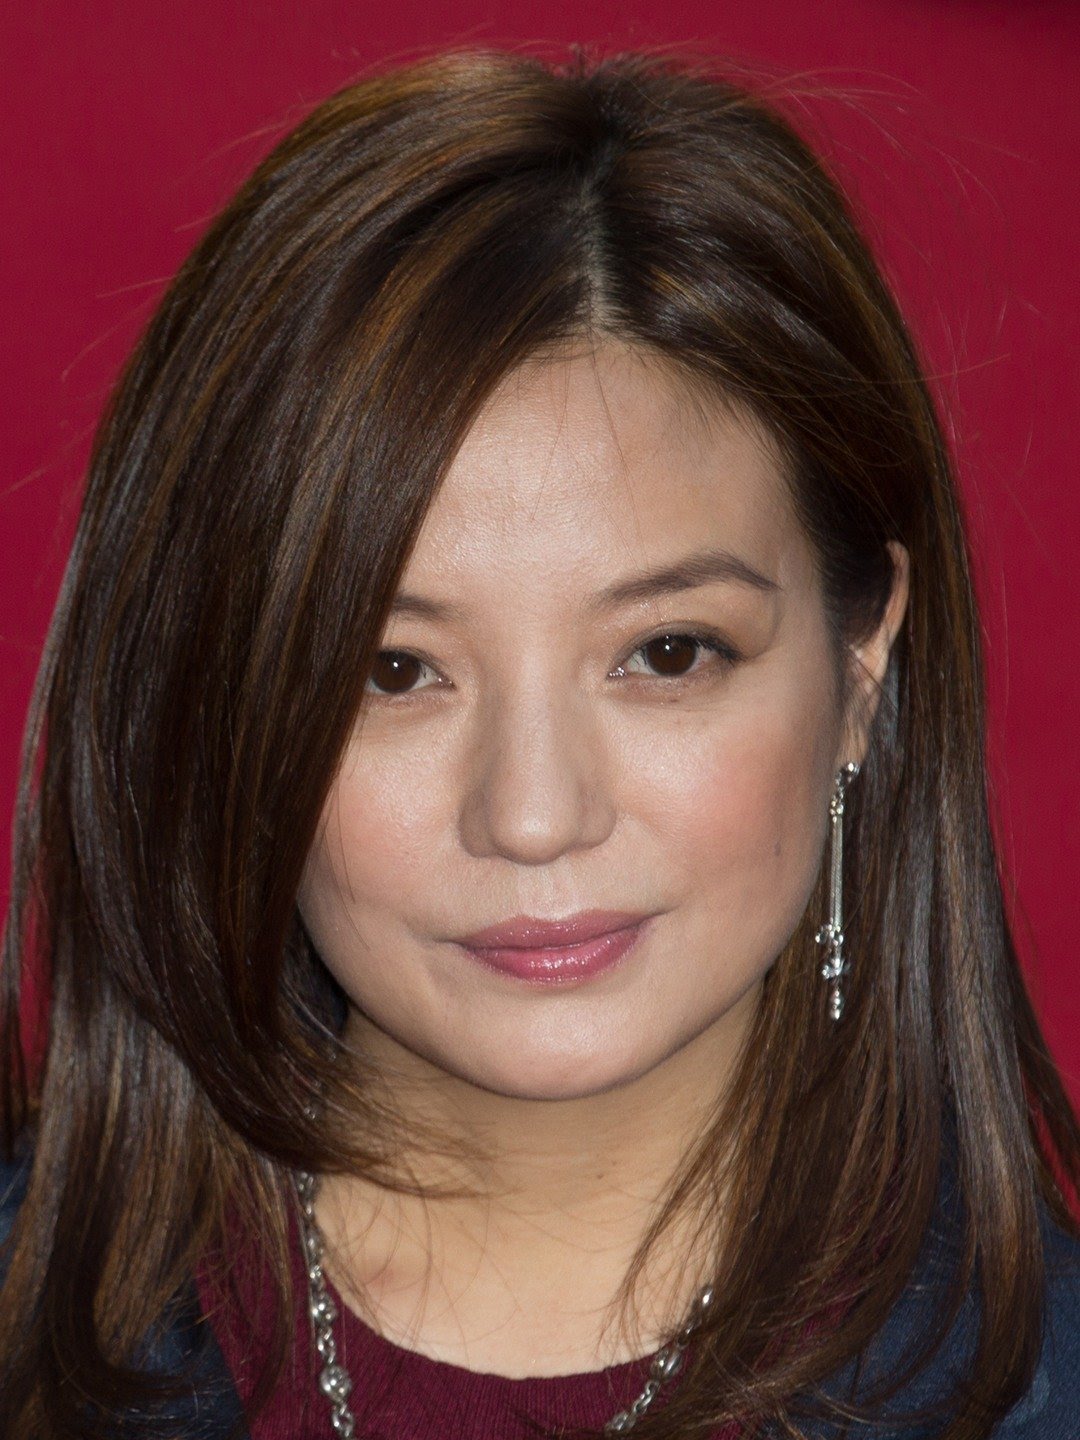 Zhao Wei Chinese Actress, Director, Producer, Singer